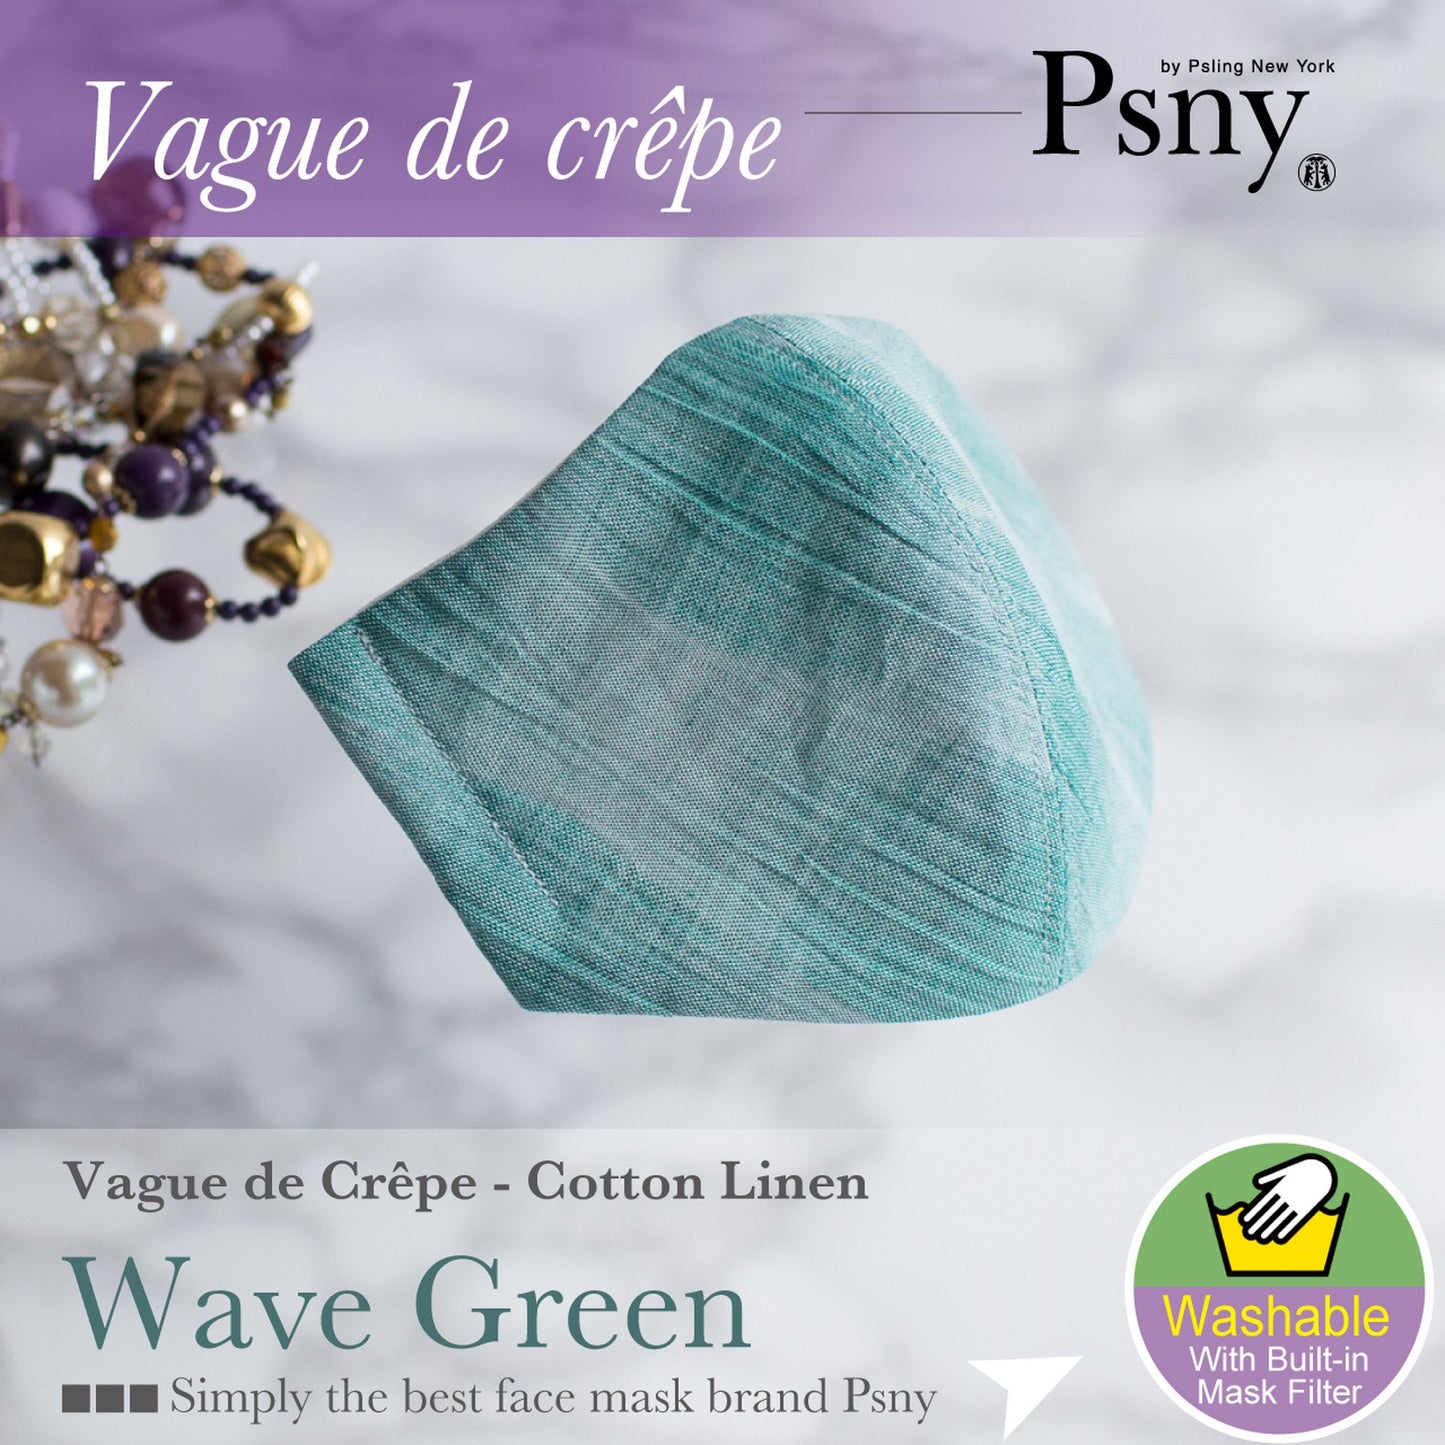 PSNY Free Shipping Crepe Wave Green Cotton Linen Pollen Non-Woven Fabric Filter Contact Coolness Yoryu Luxury Beauty Viridian Grass Green Beautiful Adult 3D Mask Adult Mask -PW02